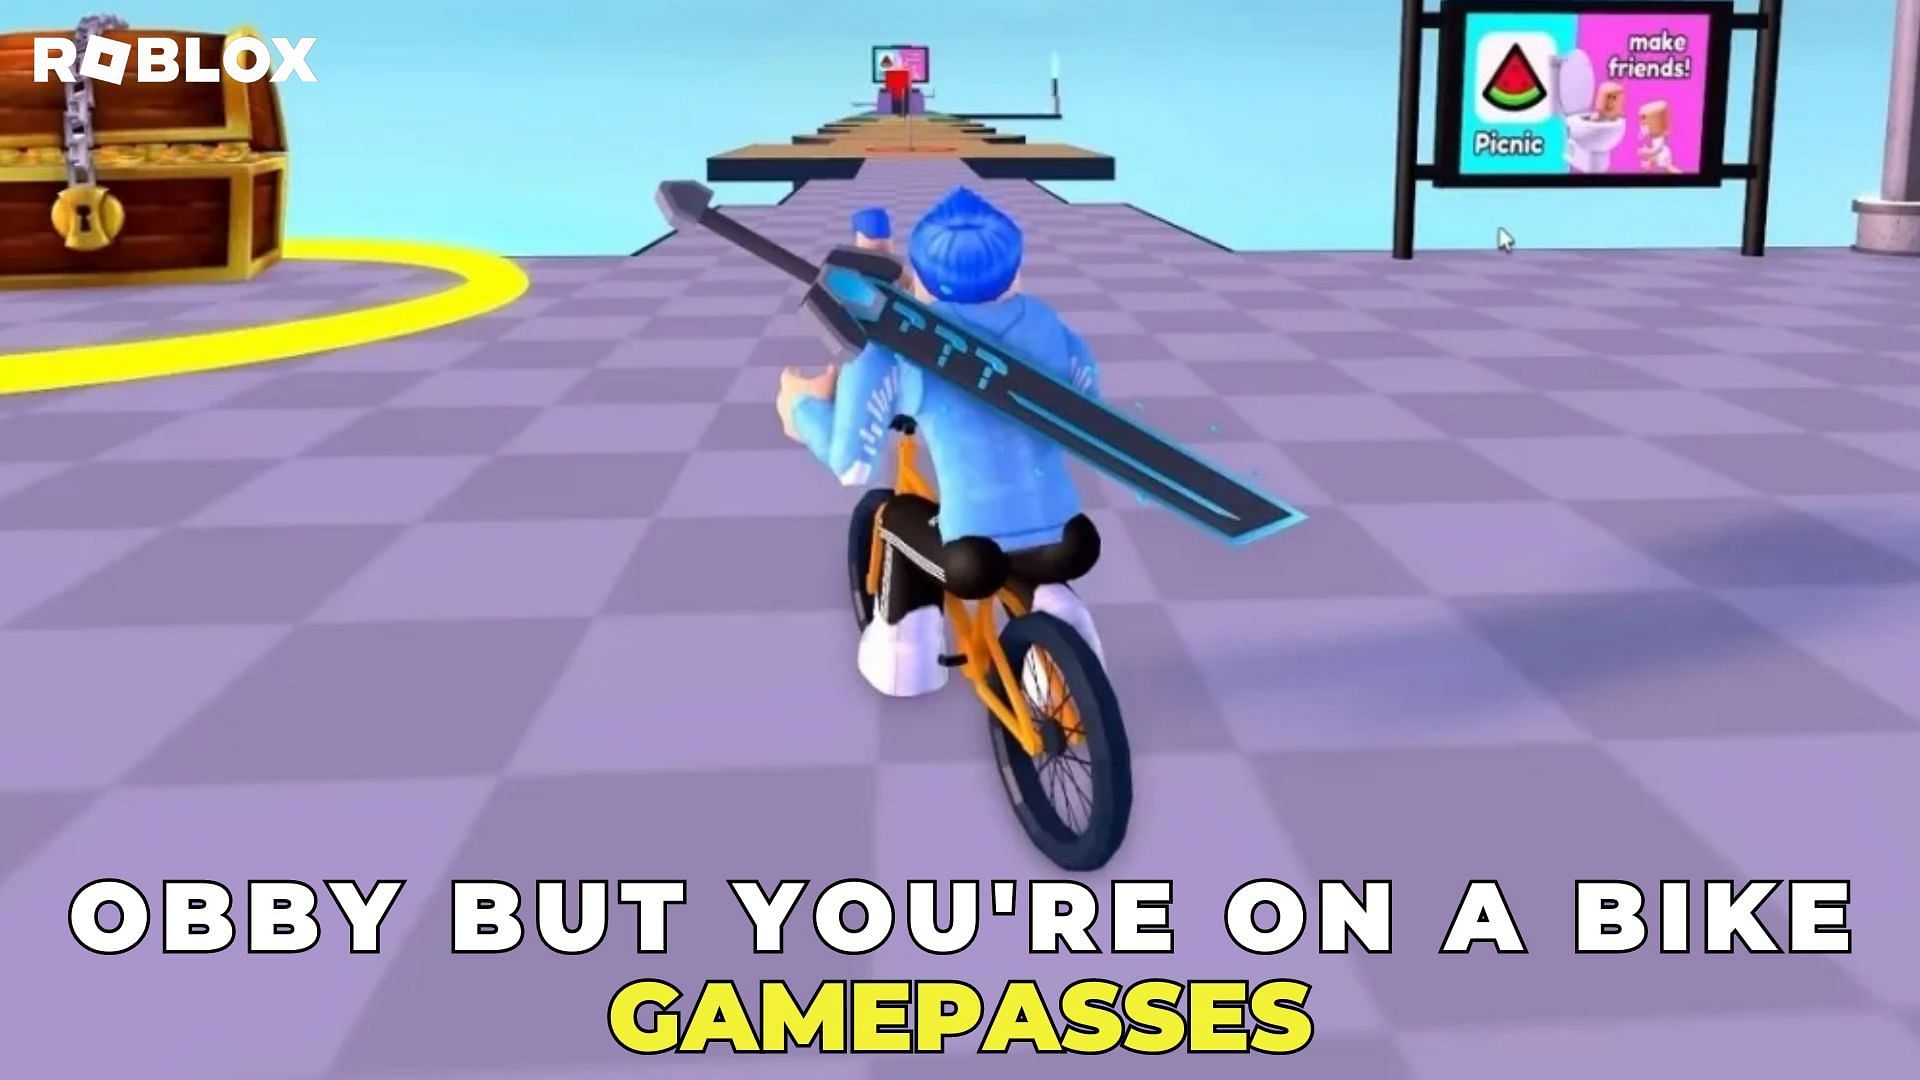 Every gamepass in Obby but you